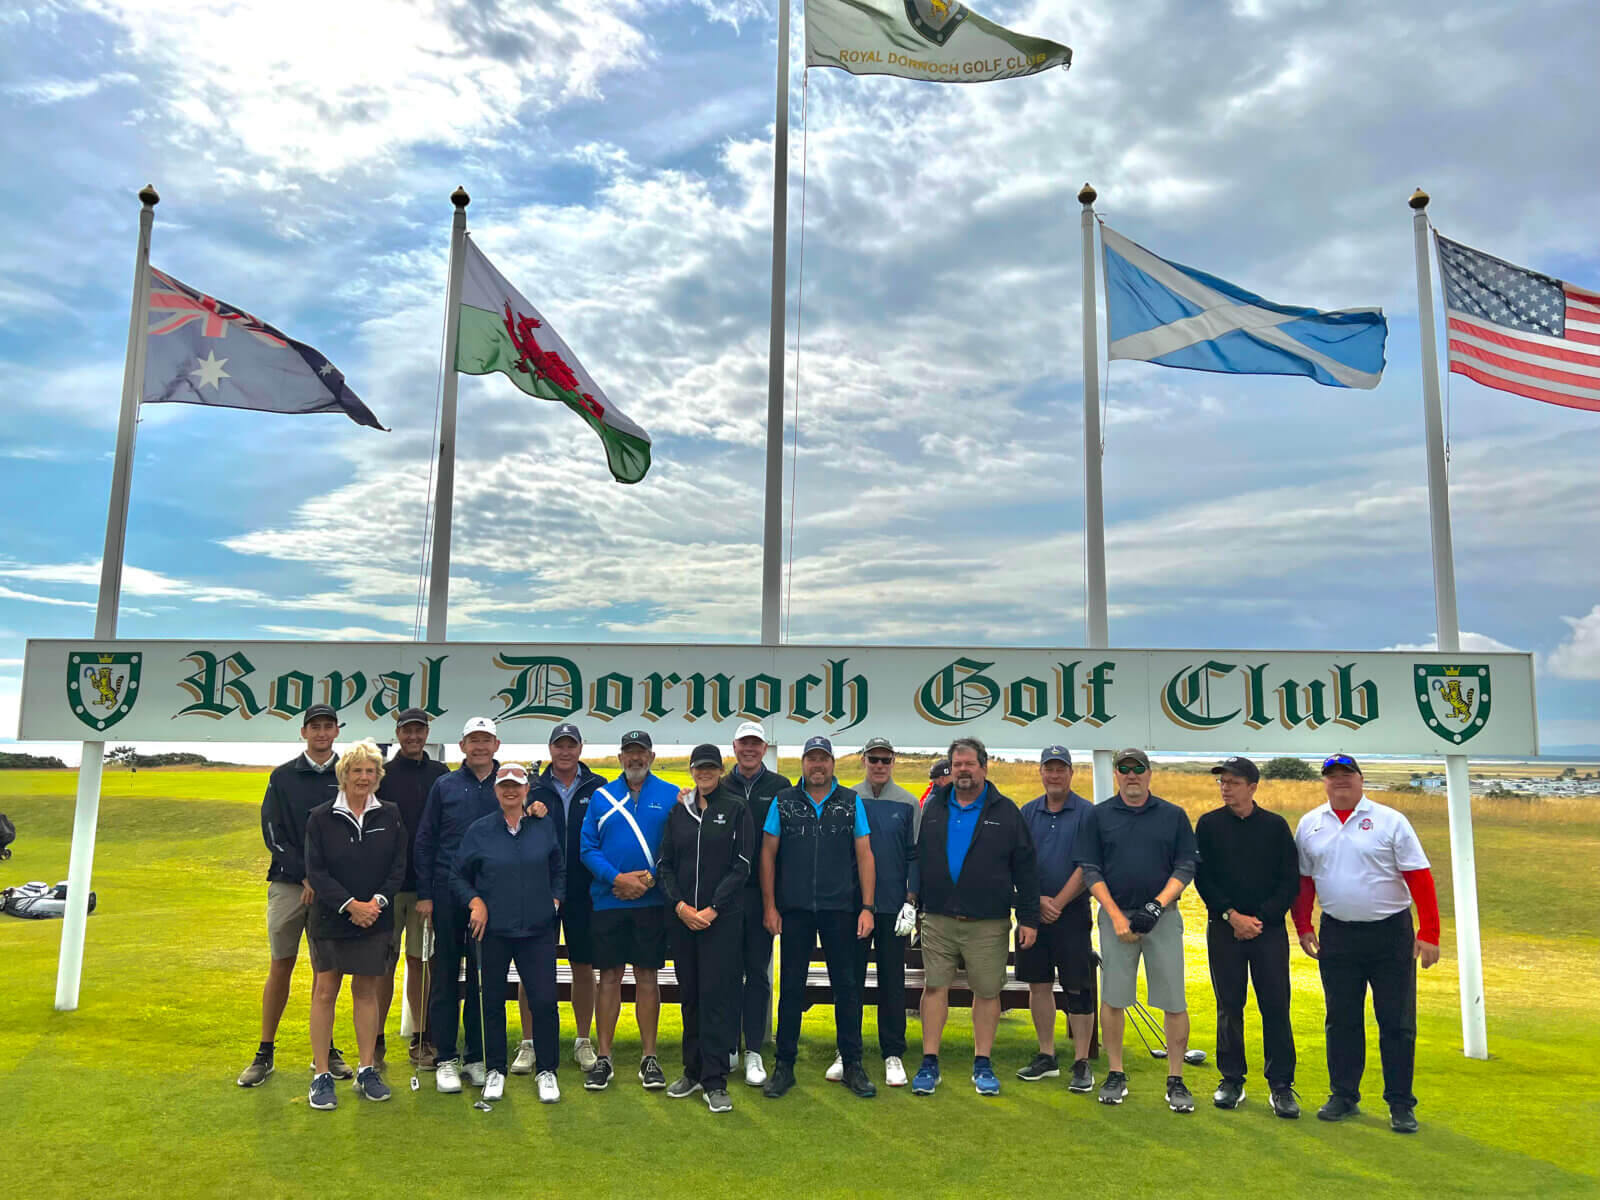 Tour group stands in front of golf course